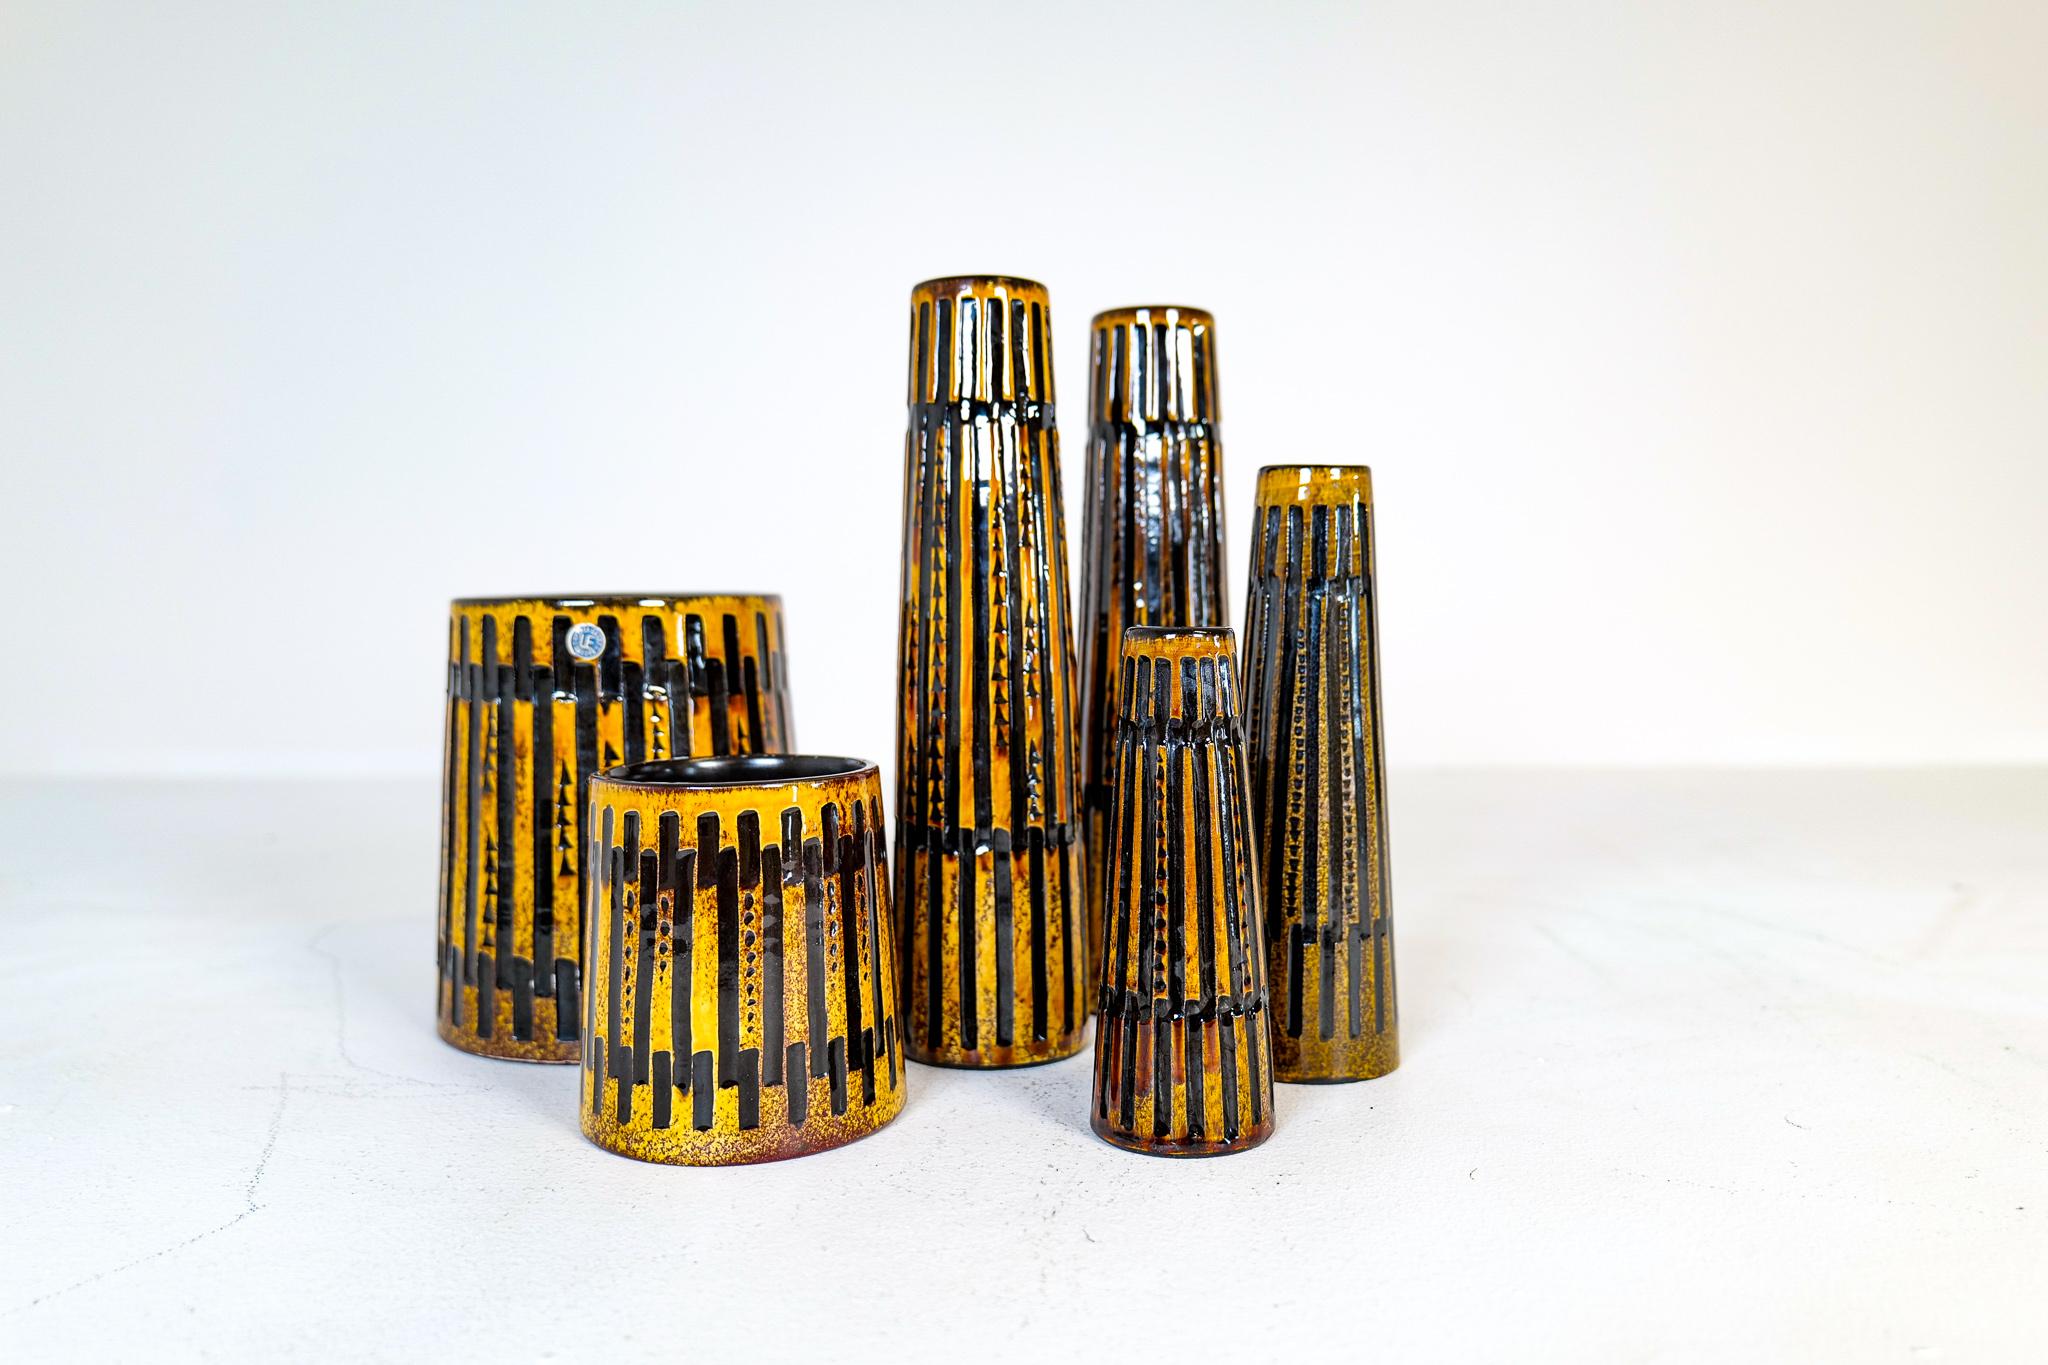 Wonderful midcentury vases and platter produced by Upsala Ekeby Sweden designed by Ingrid Atterberg 1962. The relief pattern gives life and structure to the yellow / brown glaze. 

Very good vintage condition. Small traces of wear on the